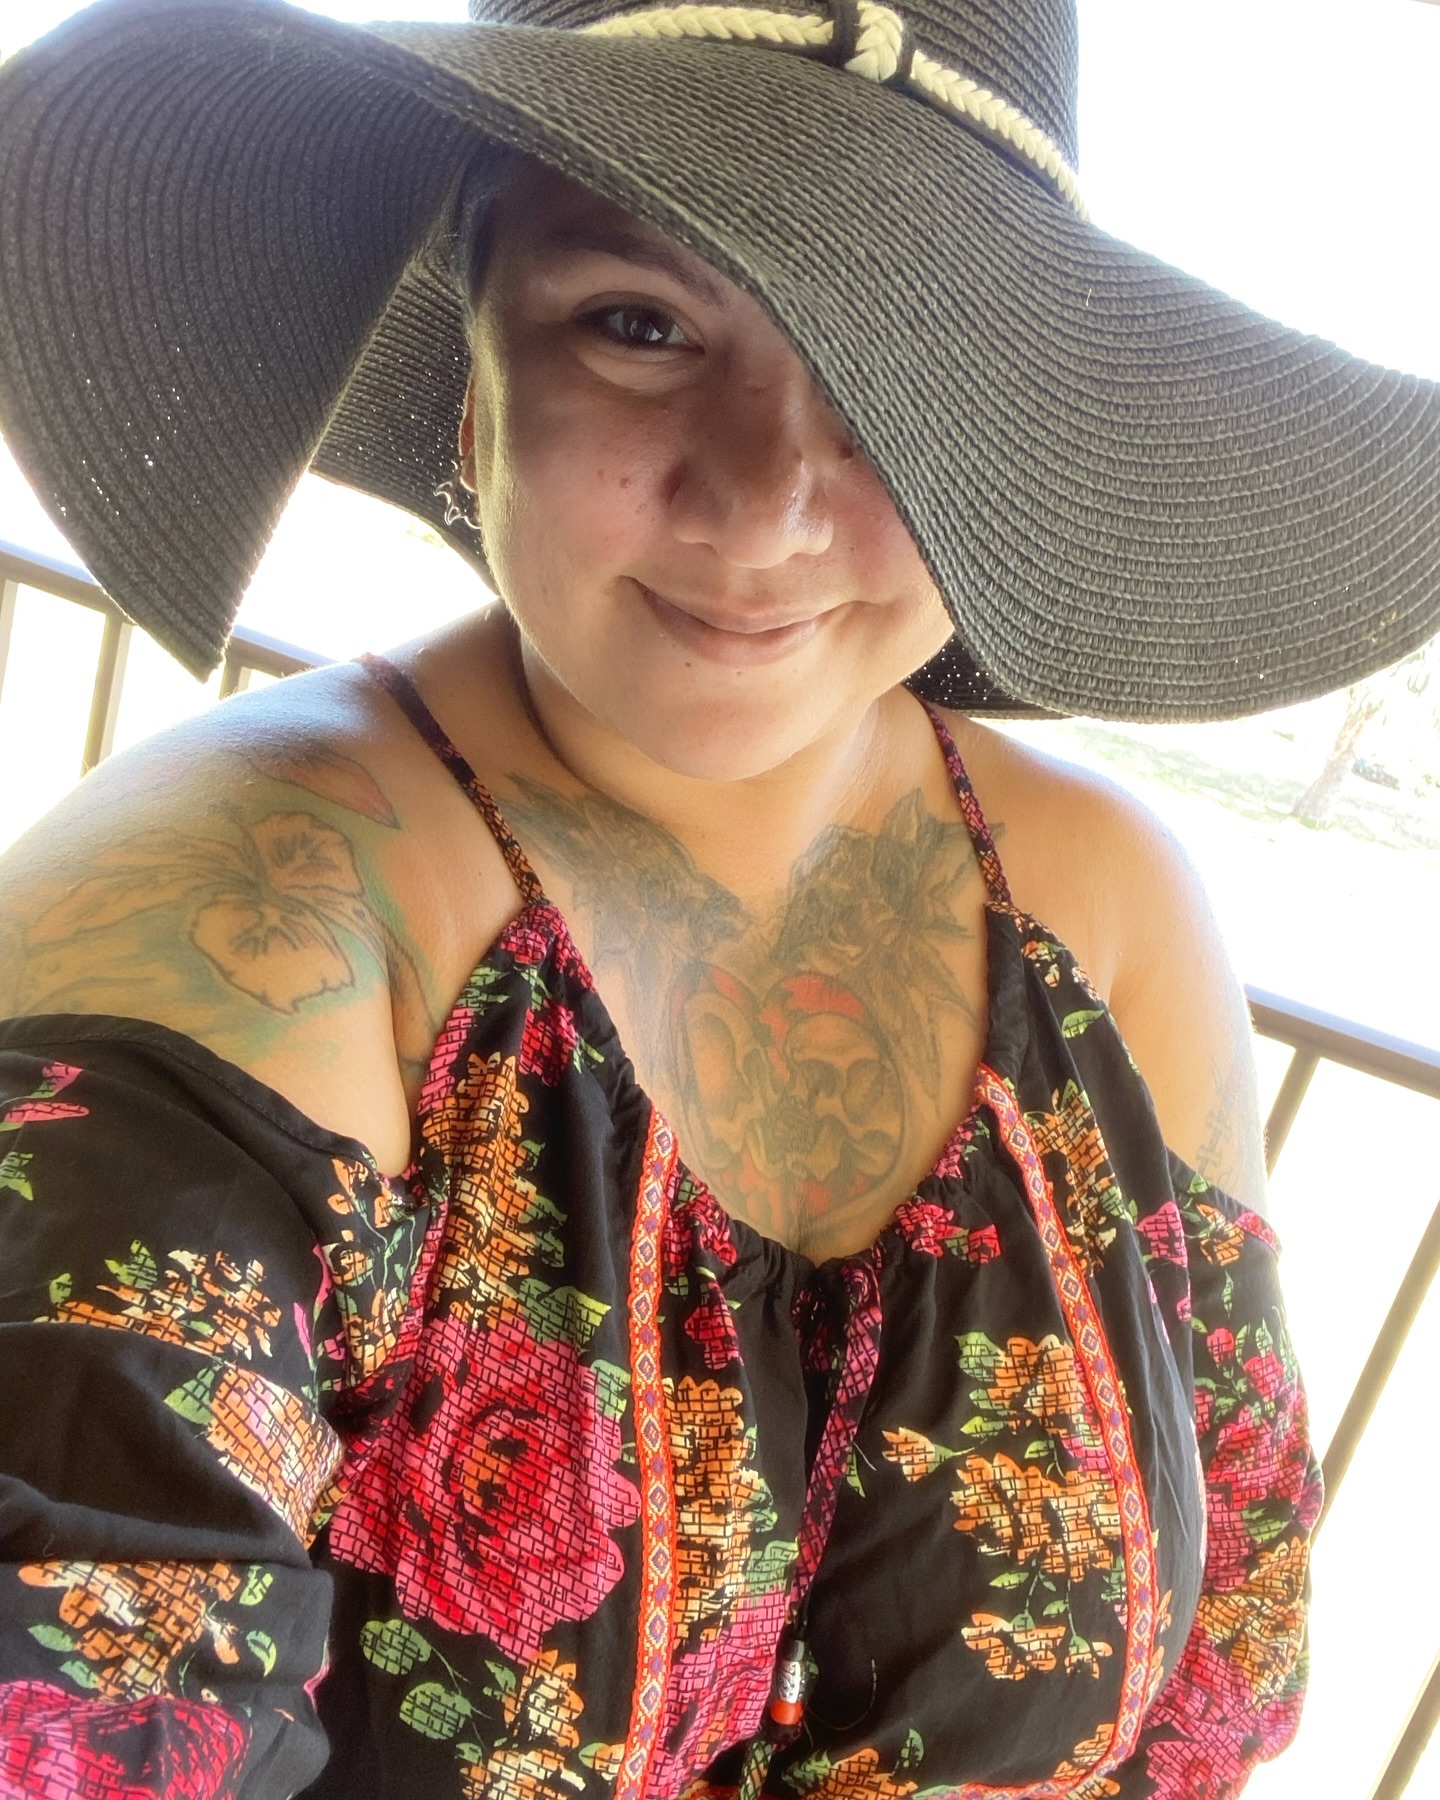 Feeling beautiful, new hat and dress my family sent me and I’m in love with how it came together